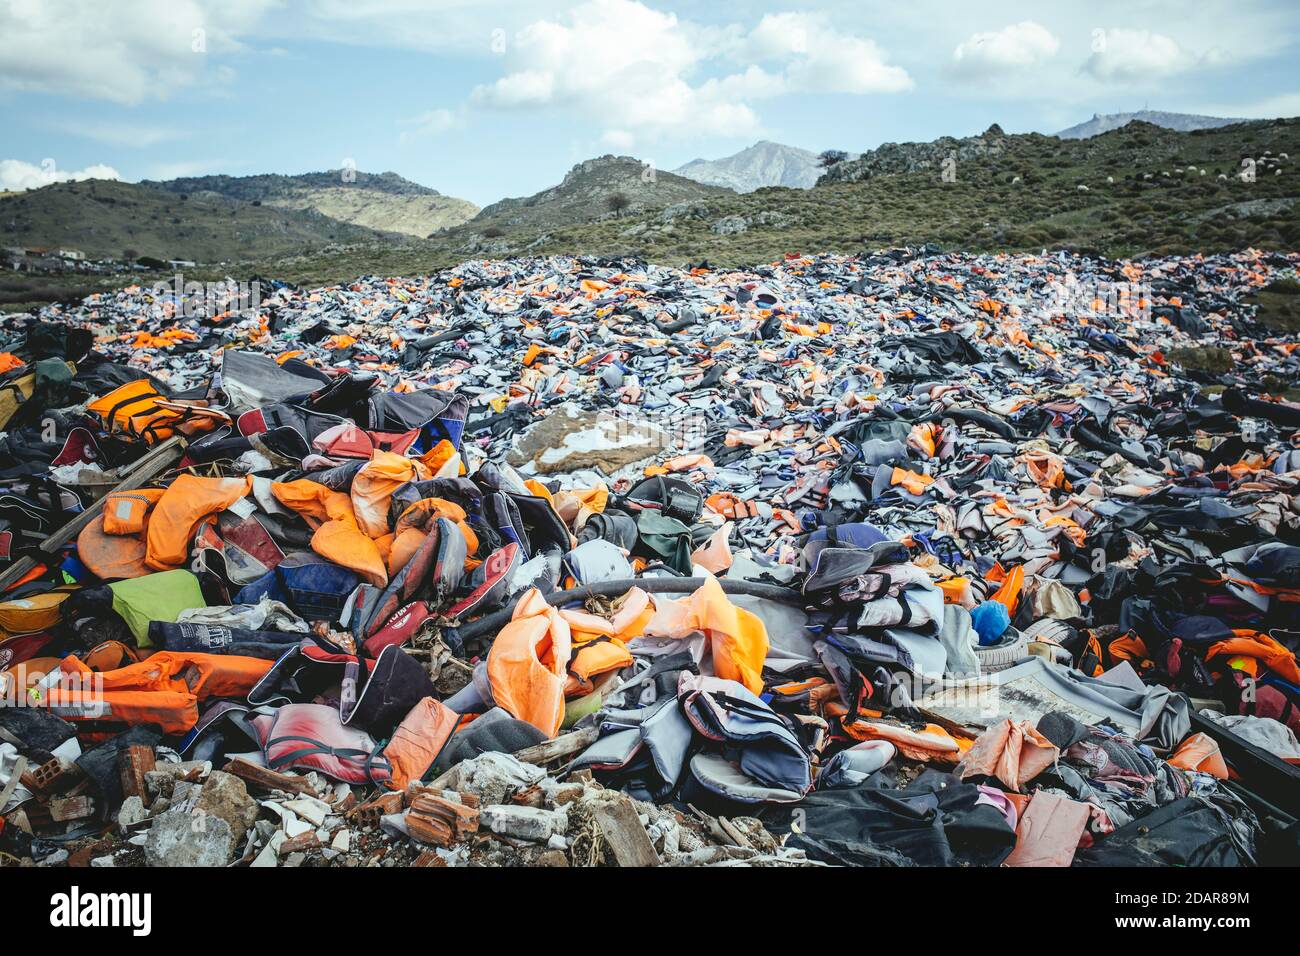 Life jackets at the waste disposal site near Molivos, Lesbos, Greece Stock Photo